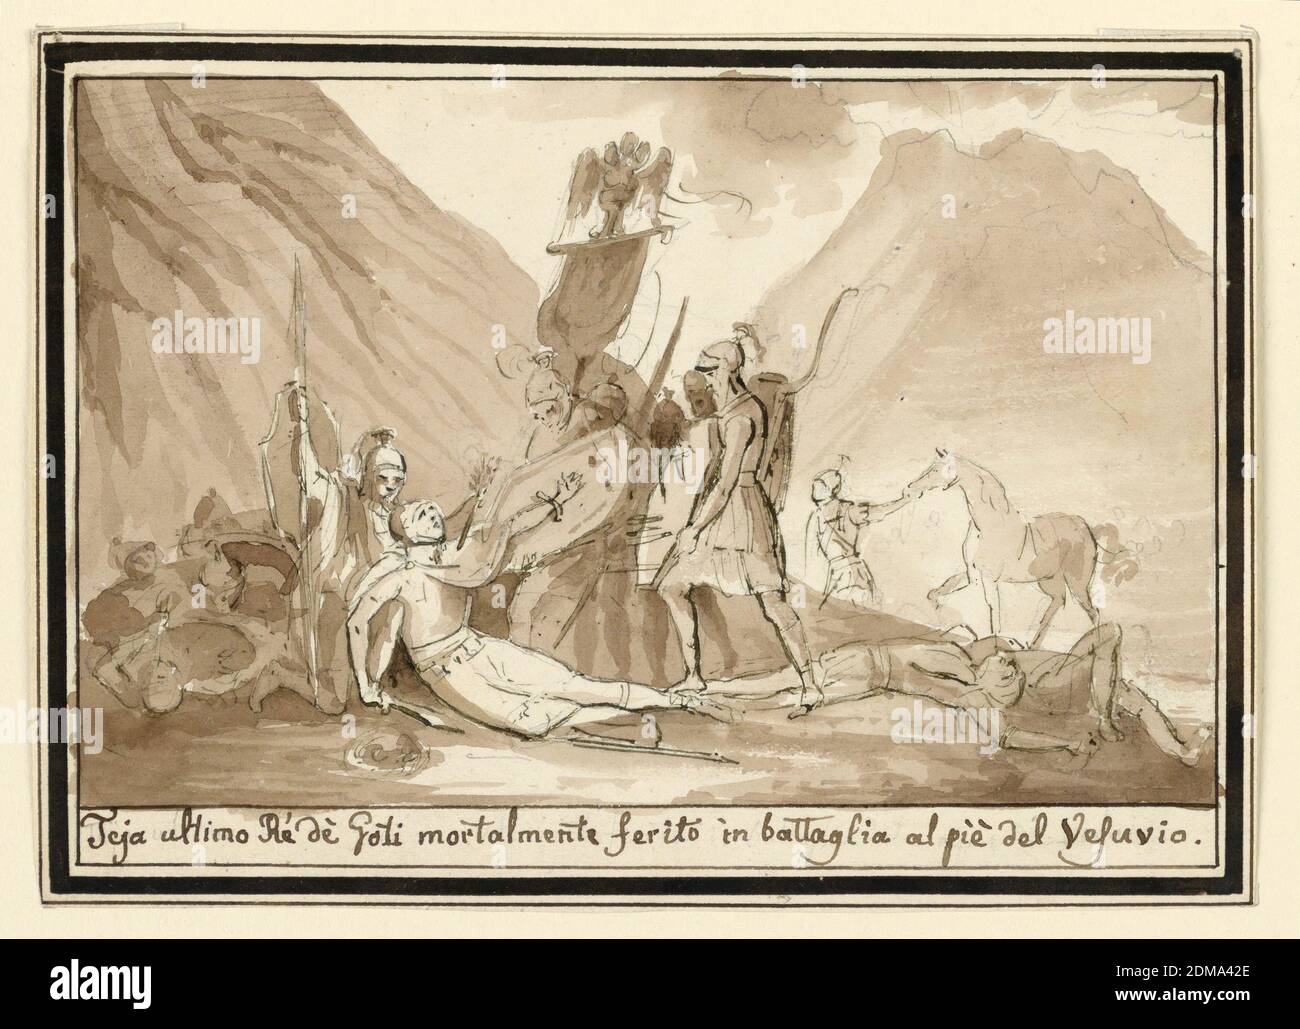 The death of King Teja, Pietro Narducci, Italian, active 1809 - 1841, Pencil, pen, ink, brush, brown watercolor on paper, Horizontal rectangle. The king lying upon the ground, supported by a soldier, raises his left artm with the shield. Corpses and soldiers are around him, one carrying a legionary eagle. Mountains, at right Vesuvius as a background. Frame, caption as -2358: 'Teja ultimo Rè dè Goti mortalmente ferito in battaglia al piè de Vesuvio.', Italy, ca. 1825–50, figures, Drawing Stock Photo